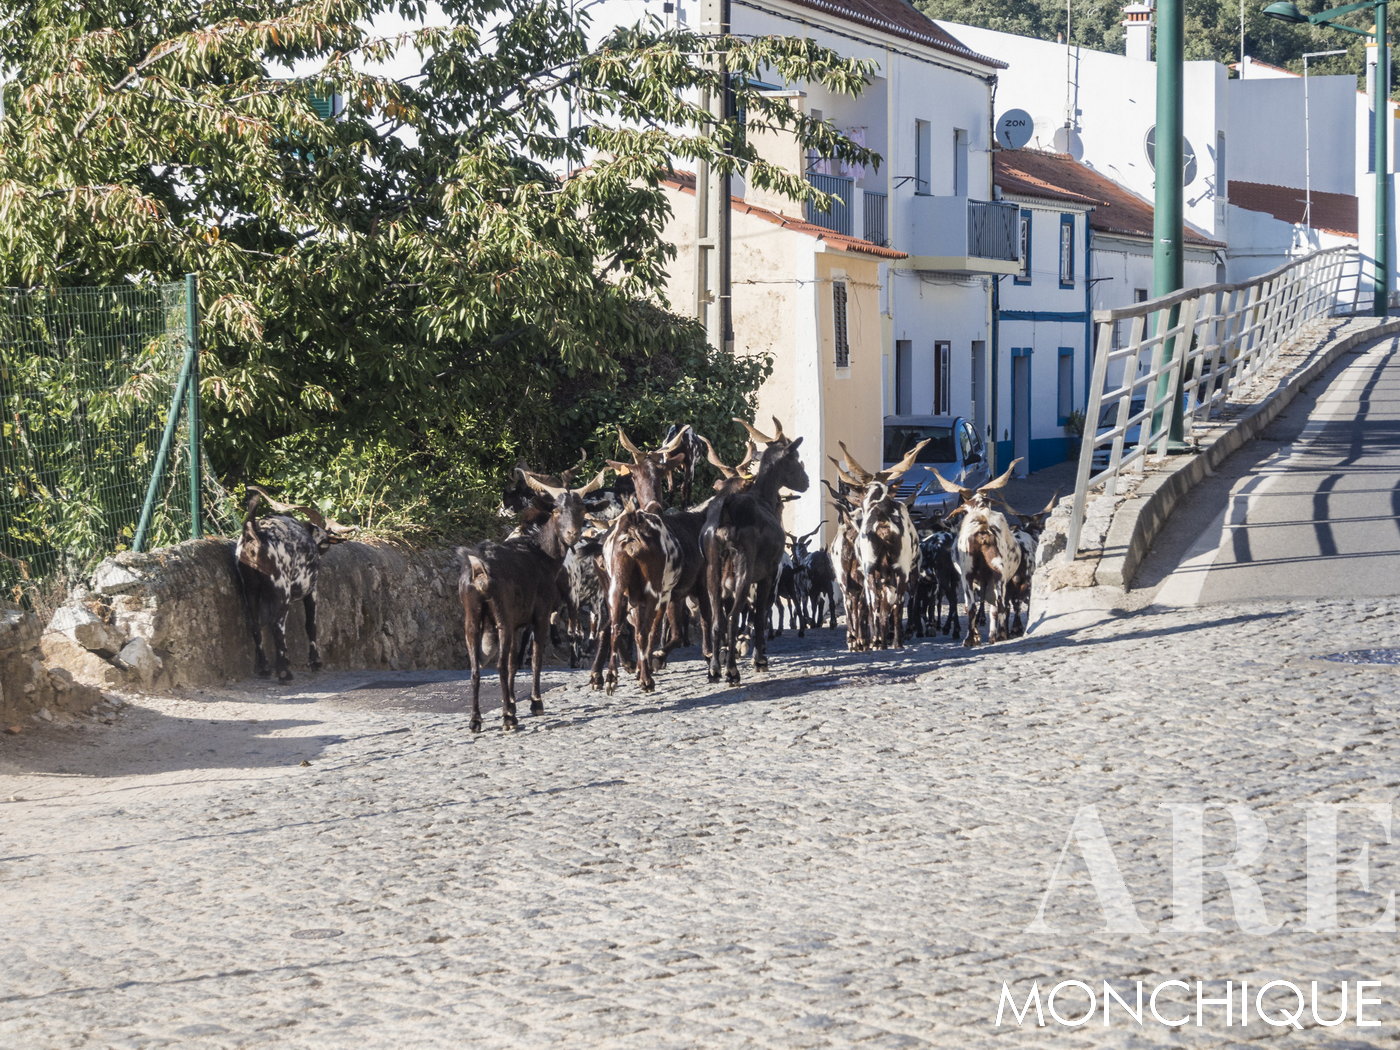 Goats Roaming the Streets of Monchique